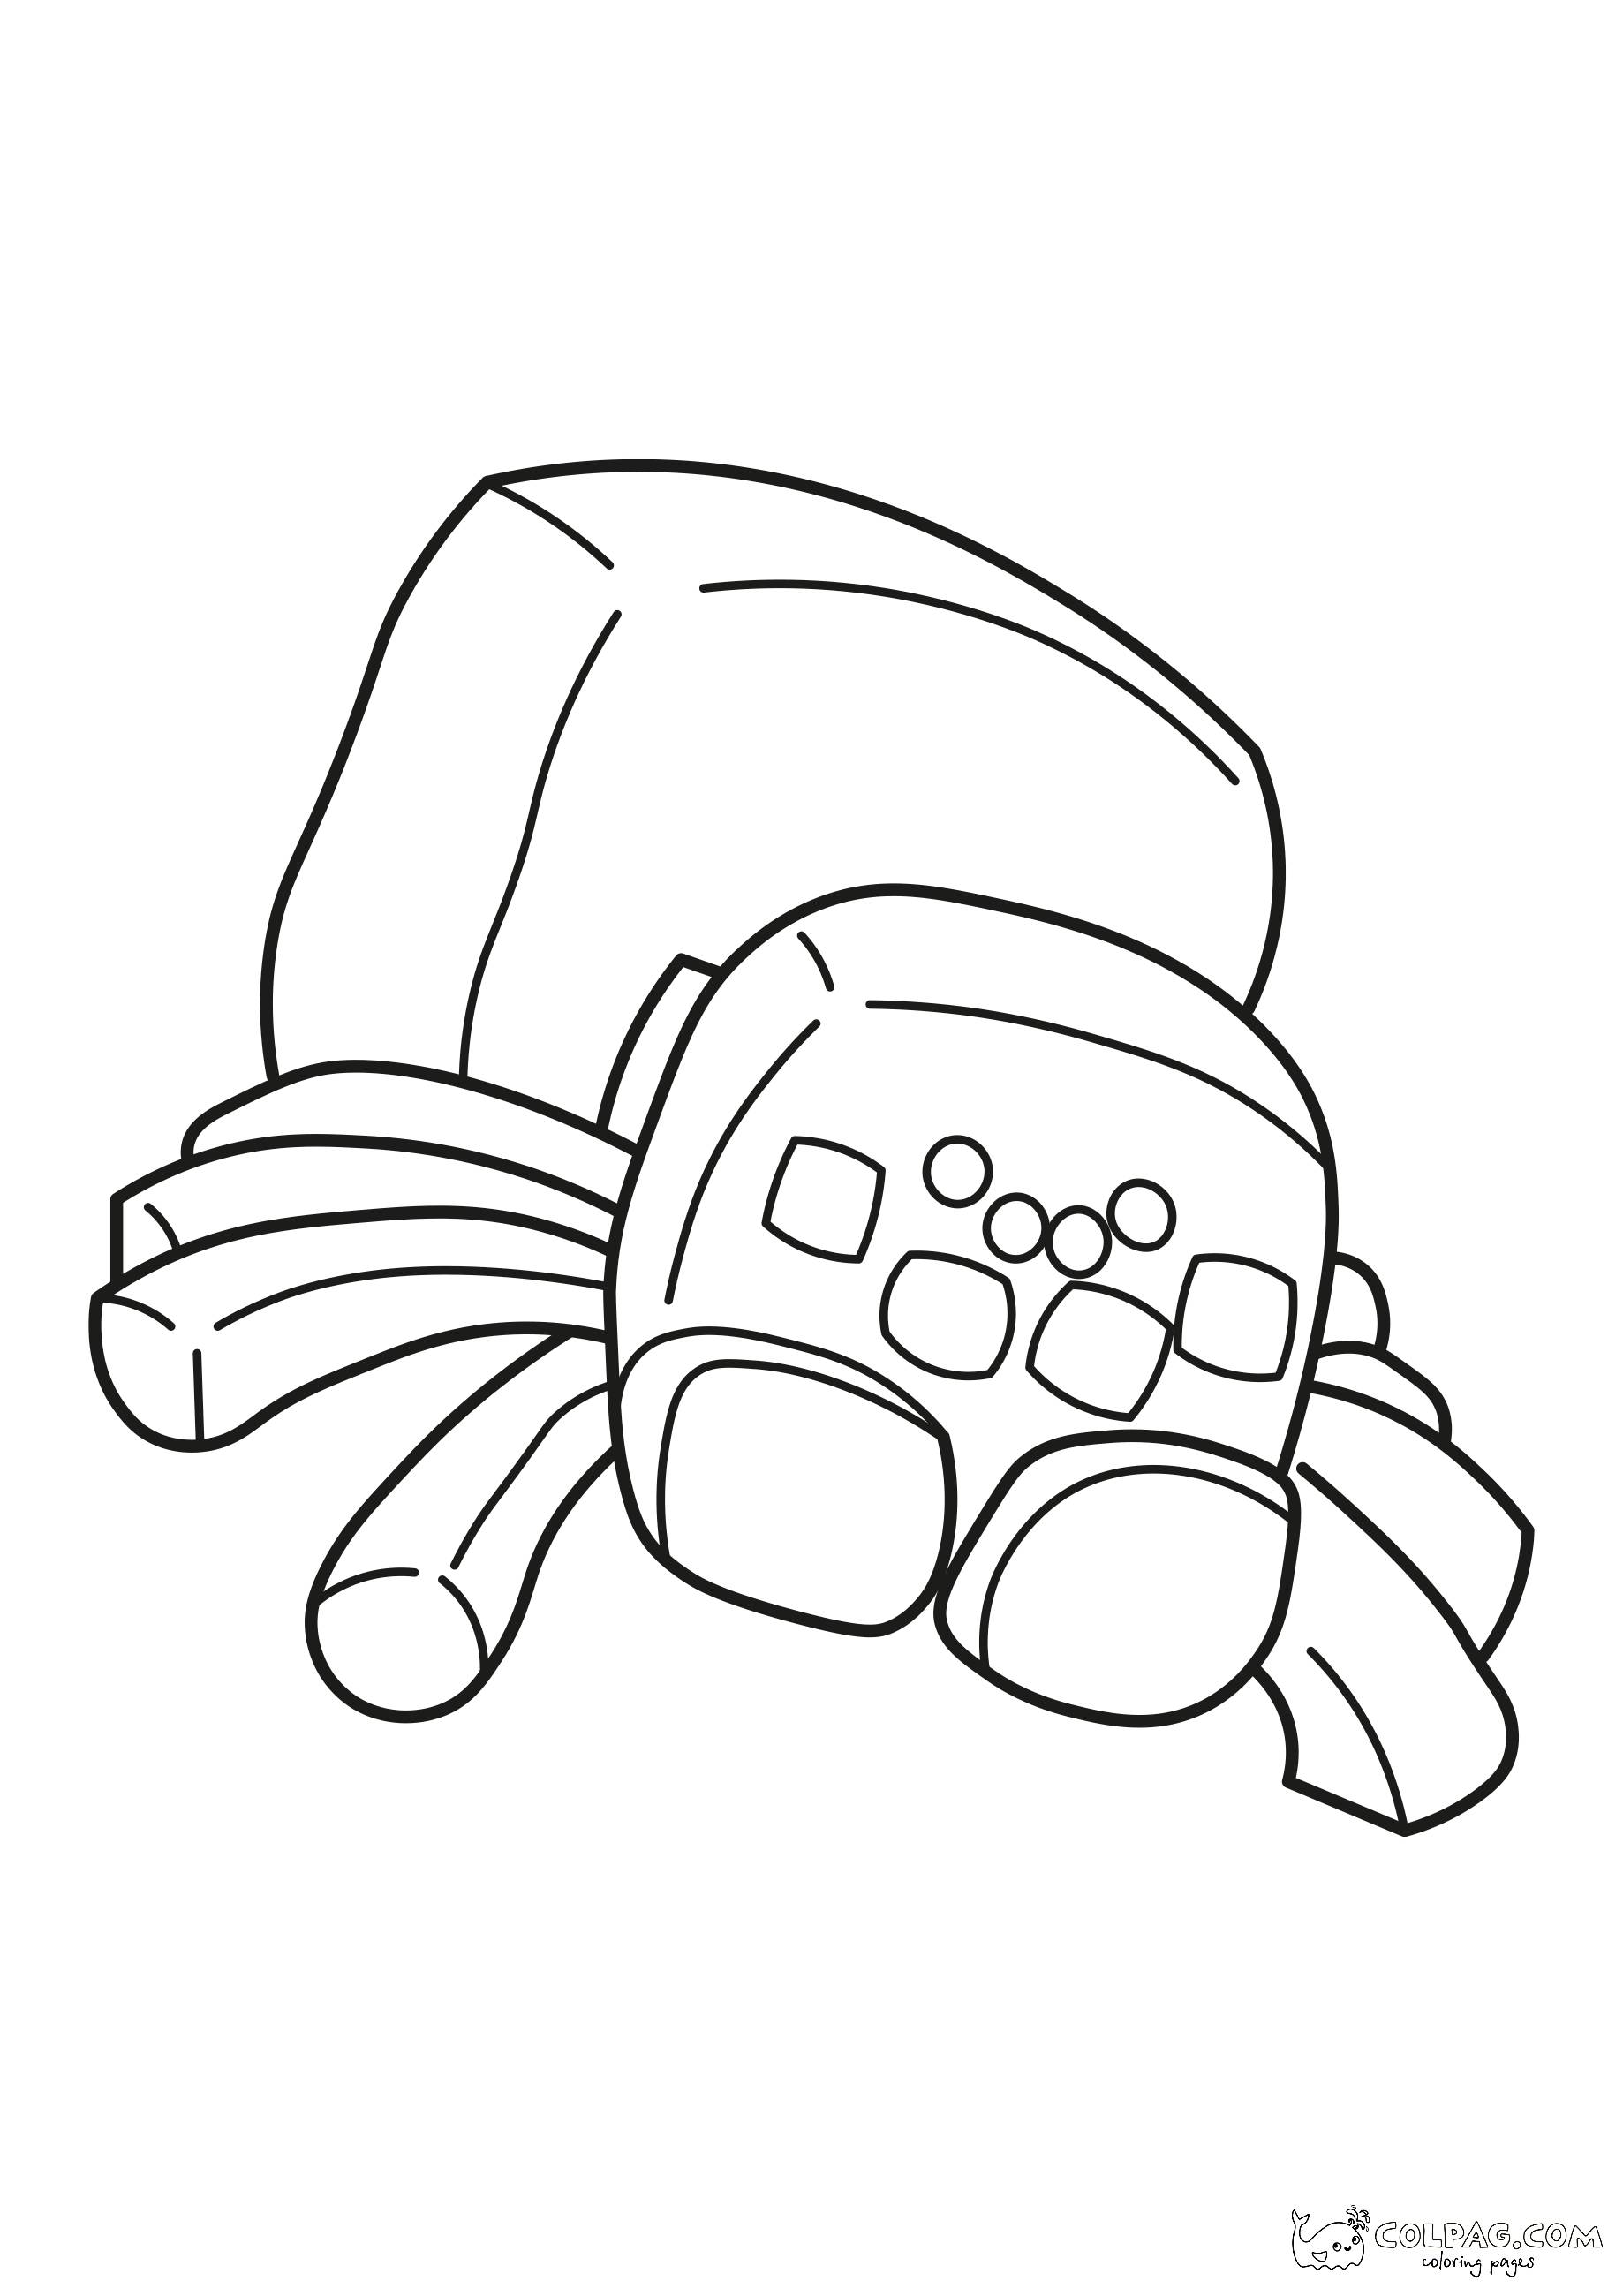 spider-1-minecraft-coloring-page-colpag